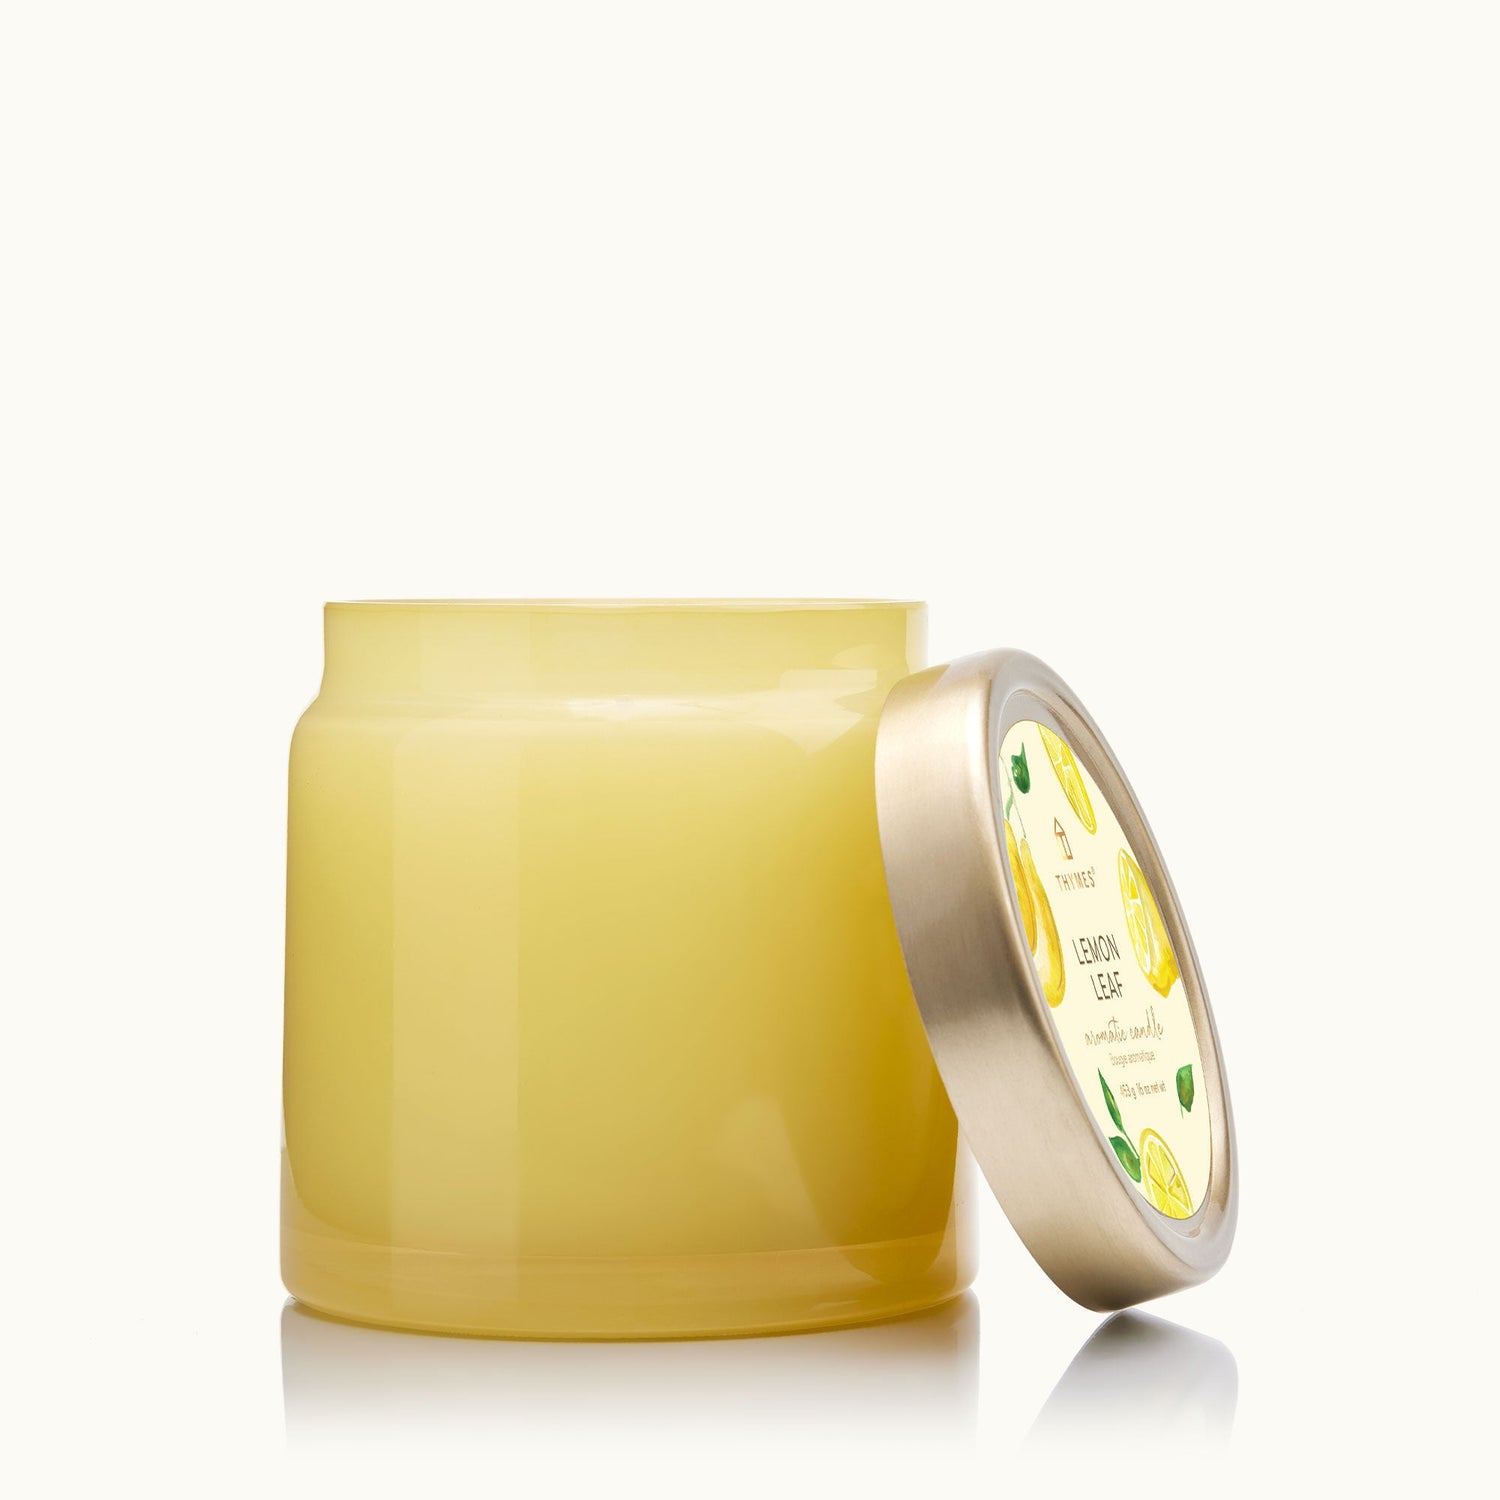 Lemon Leaf Statement Poured Candle - Gaines Jewelers